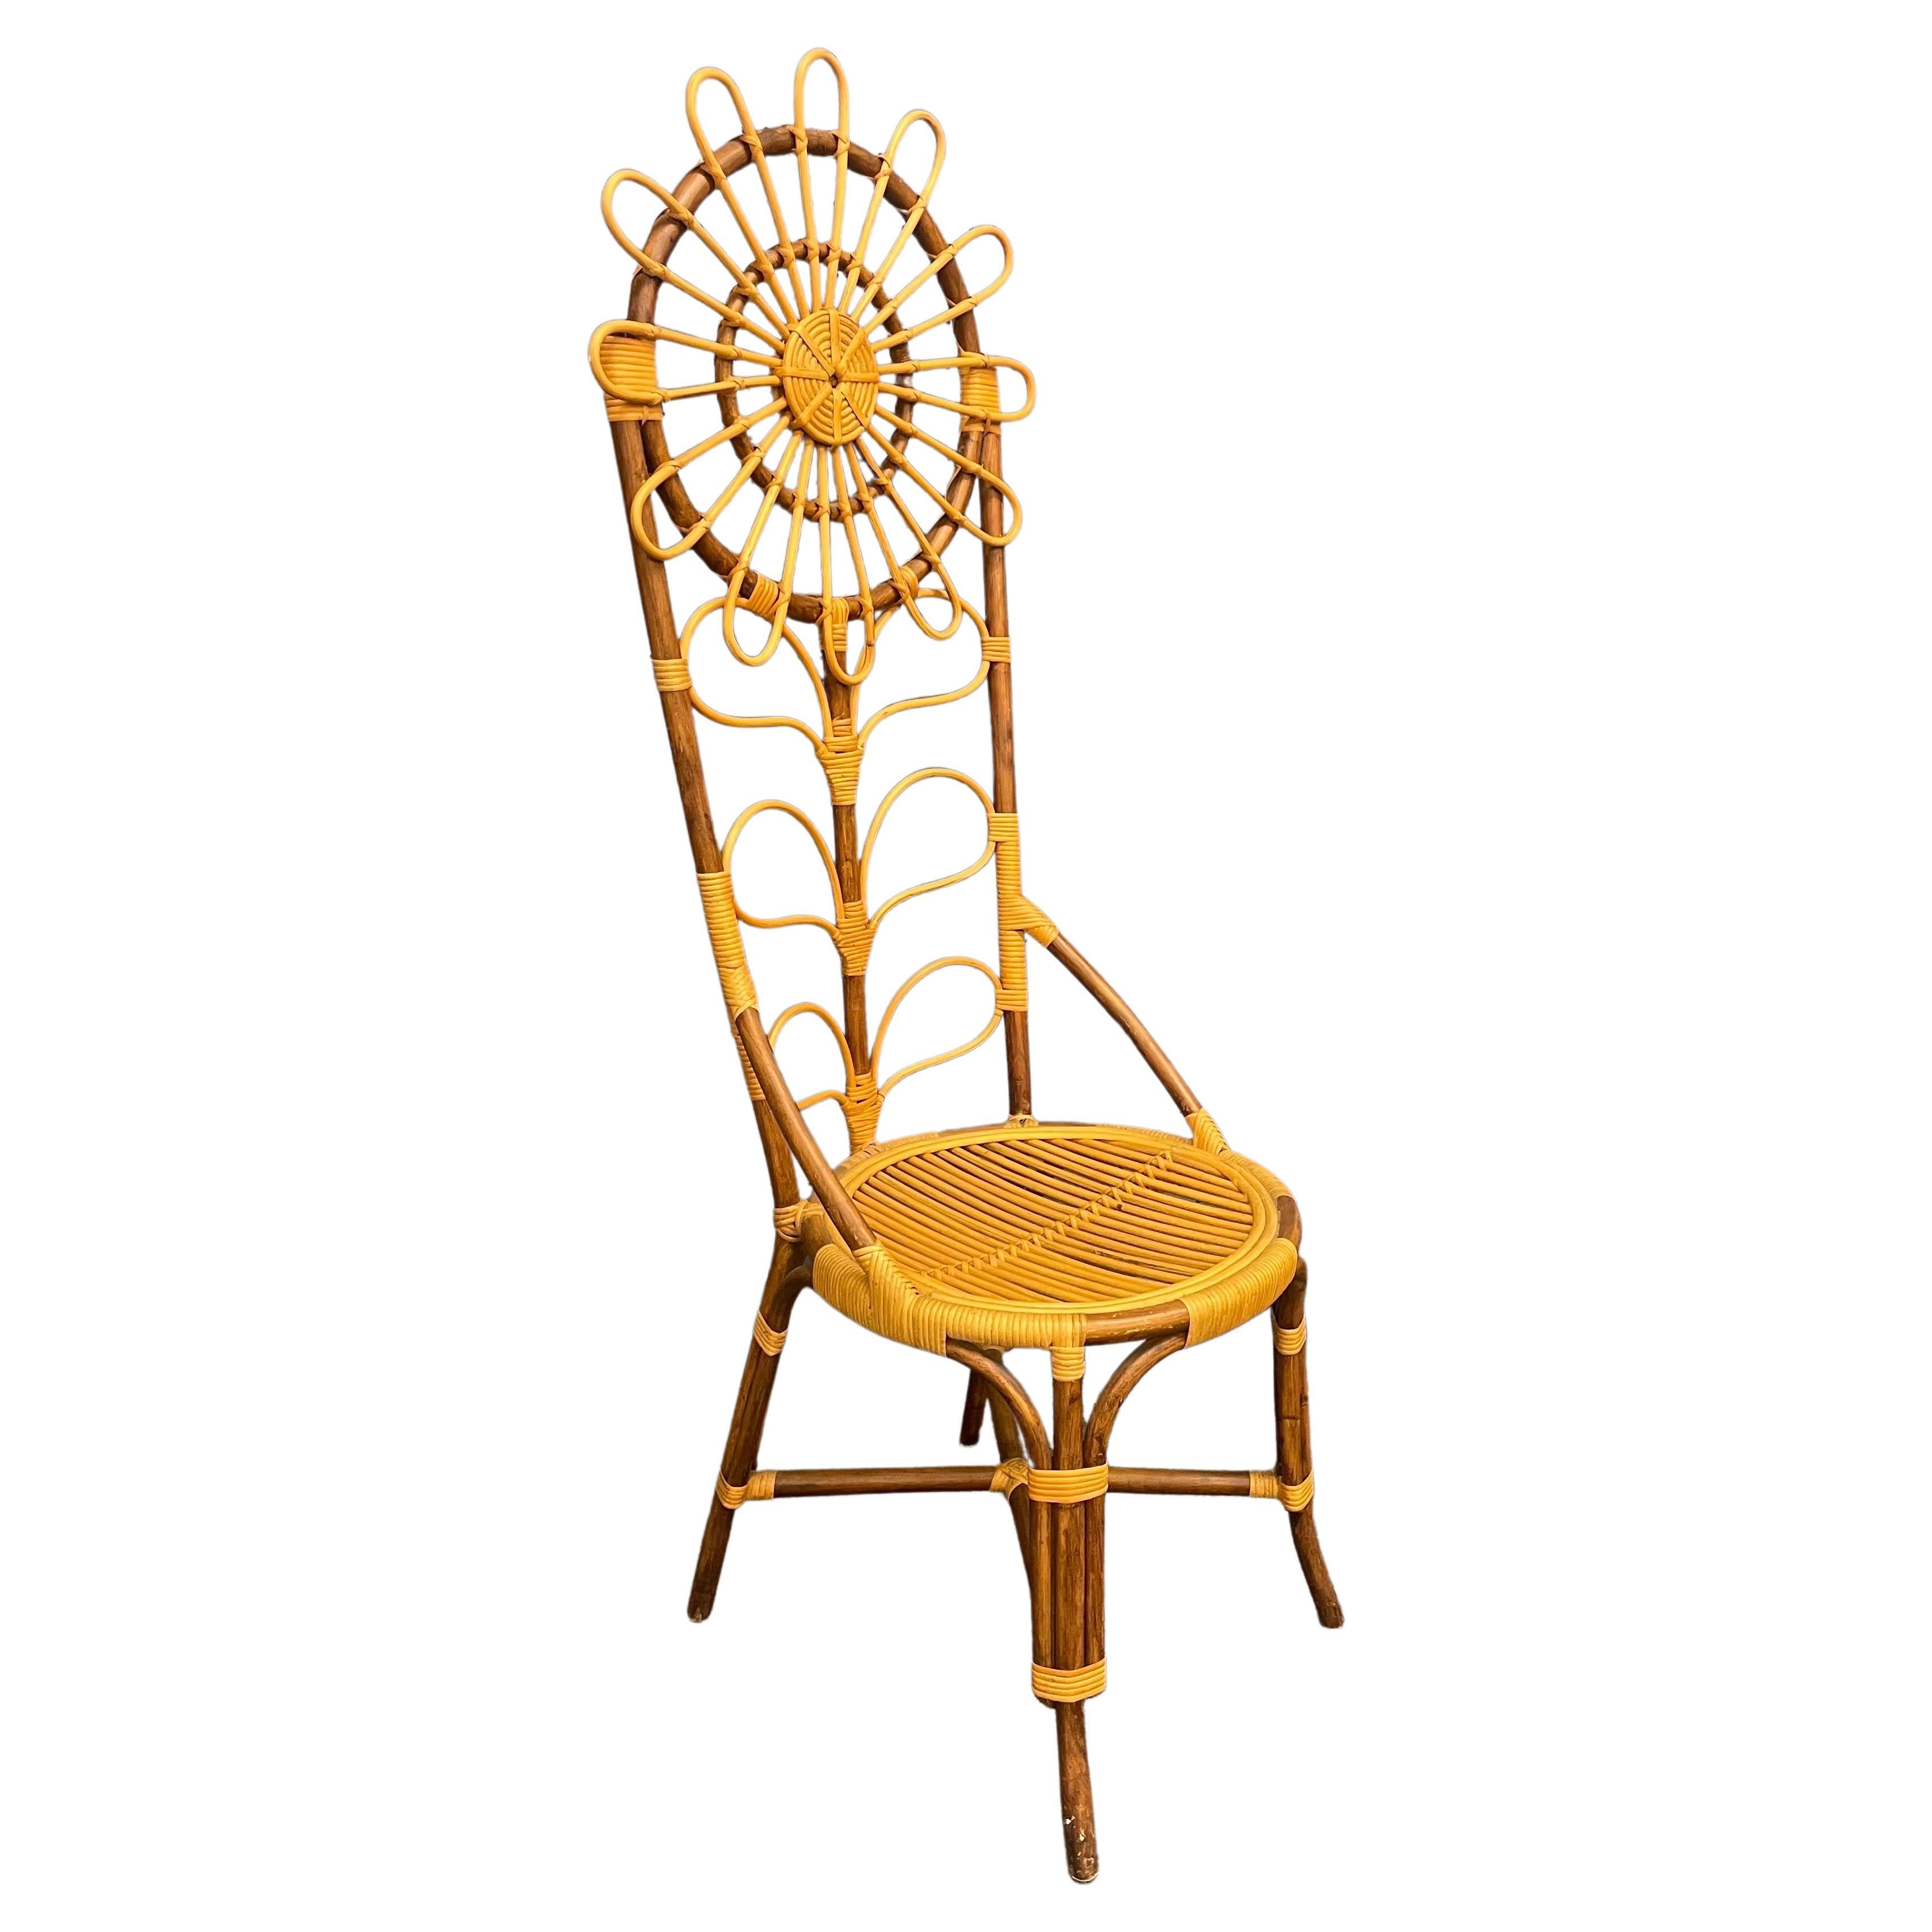 A really cool and well crafted tall bamboo sun flower chair, circa 1990s. The chair is in very good vintage condition and measures 24